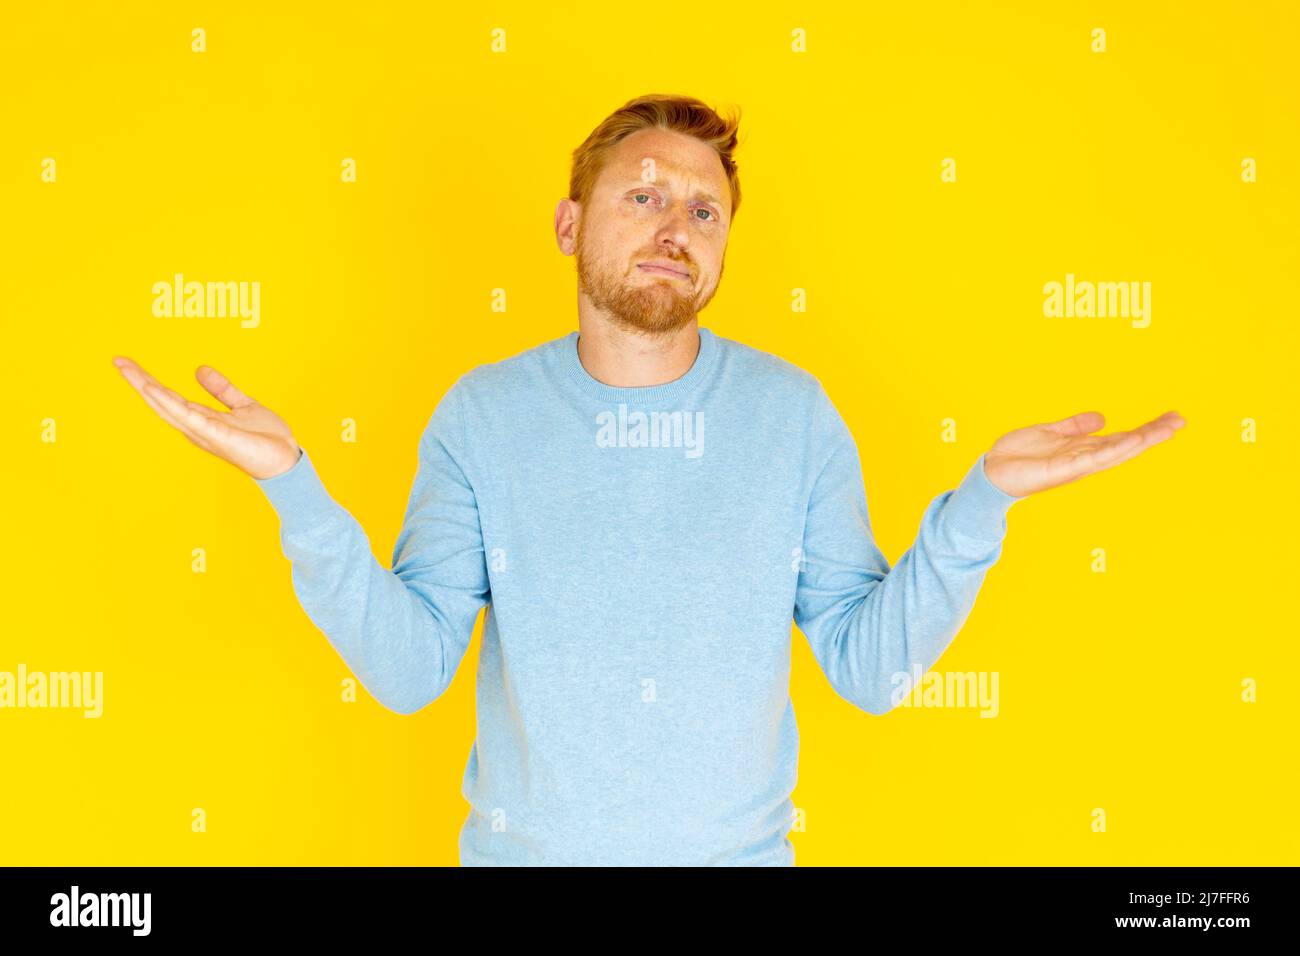 Young adult man showing doubt expression over isolated yellow background Stock Photo